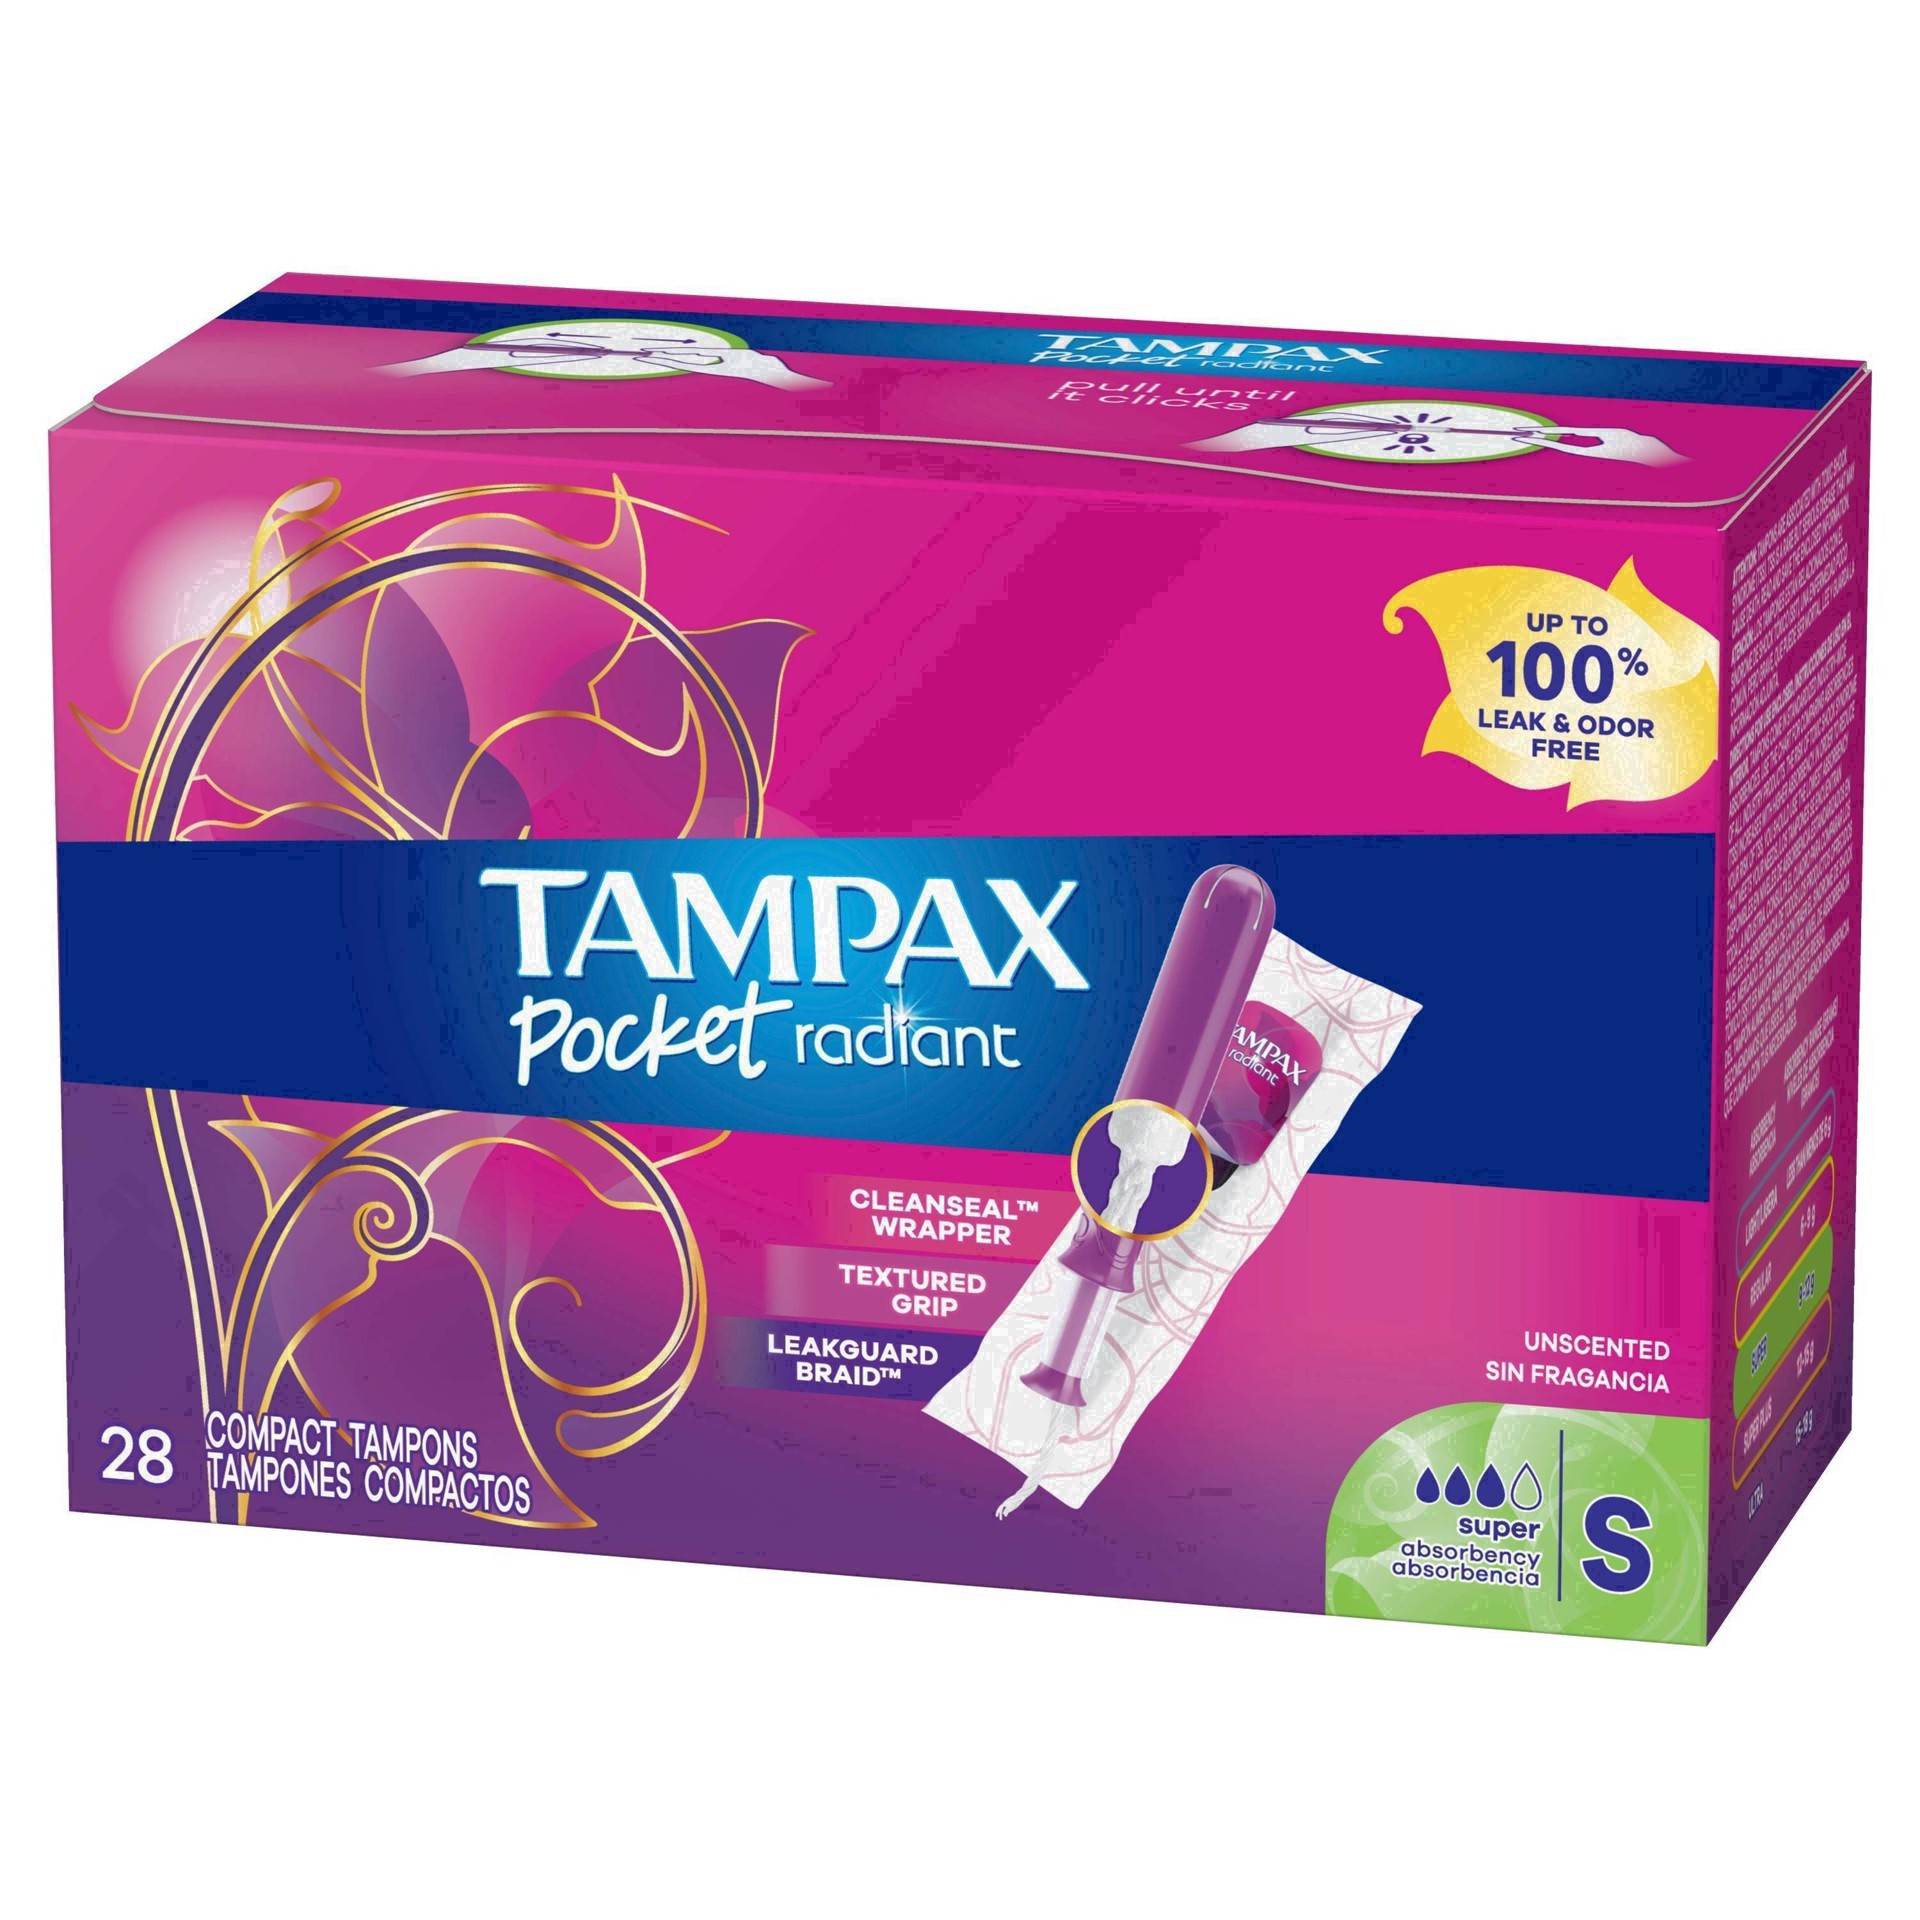 slide 20 of 94, Tampax Pocket Radiant Compact Plastic Tampons, With LeakGuard Braid, Super Absorbency, Unscented, 28 Count, 28 ct